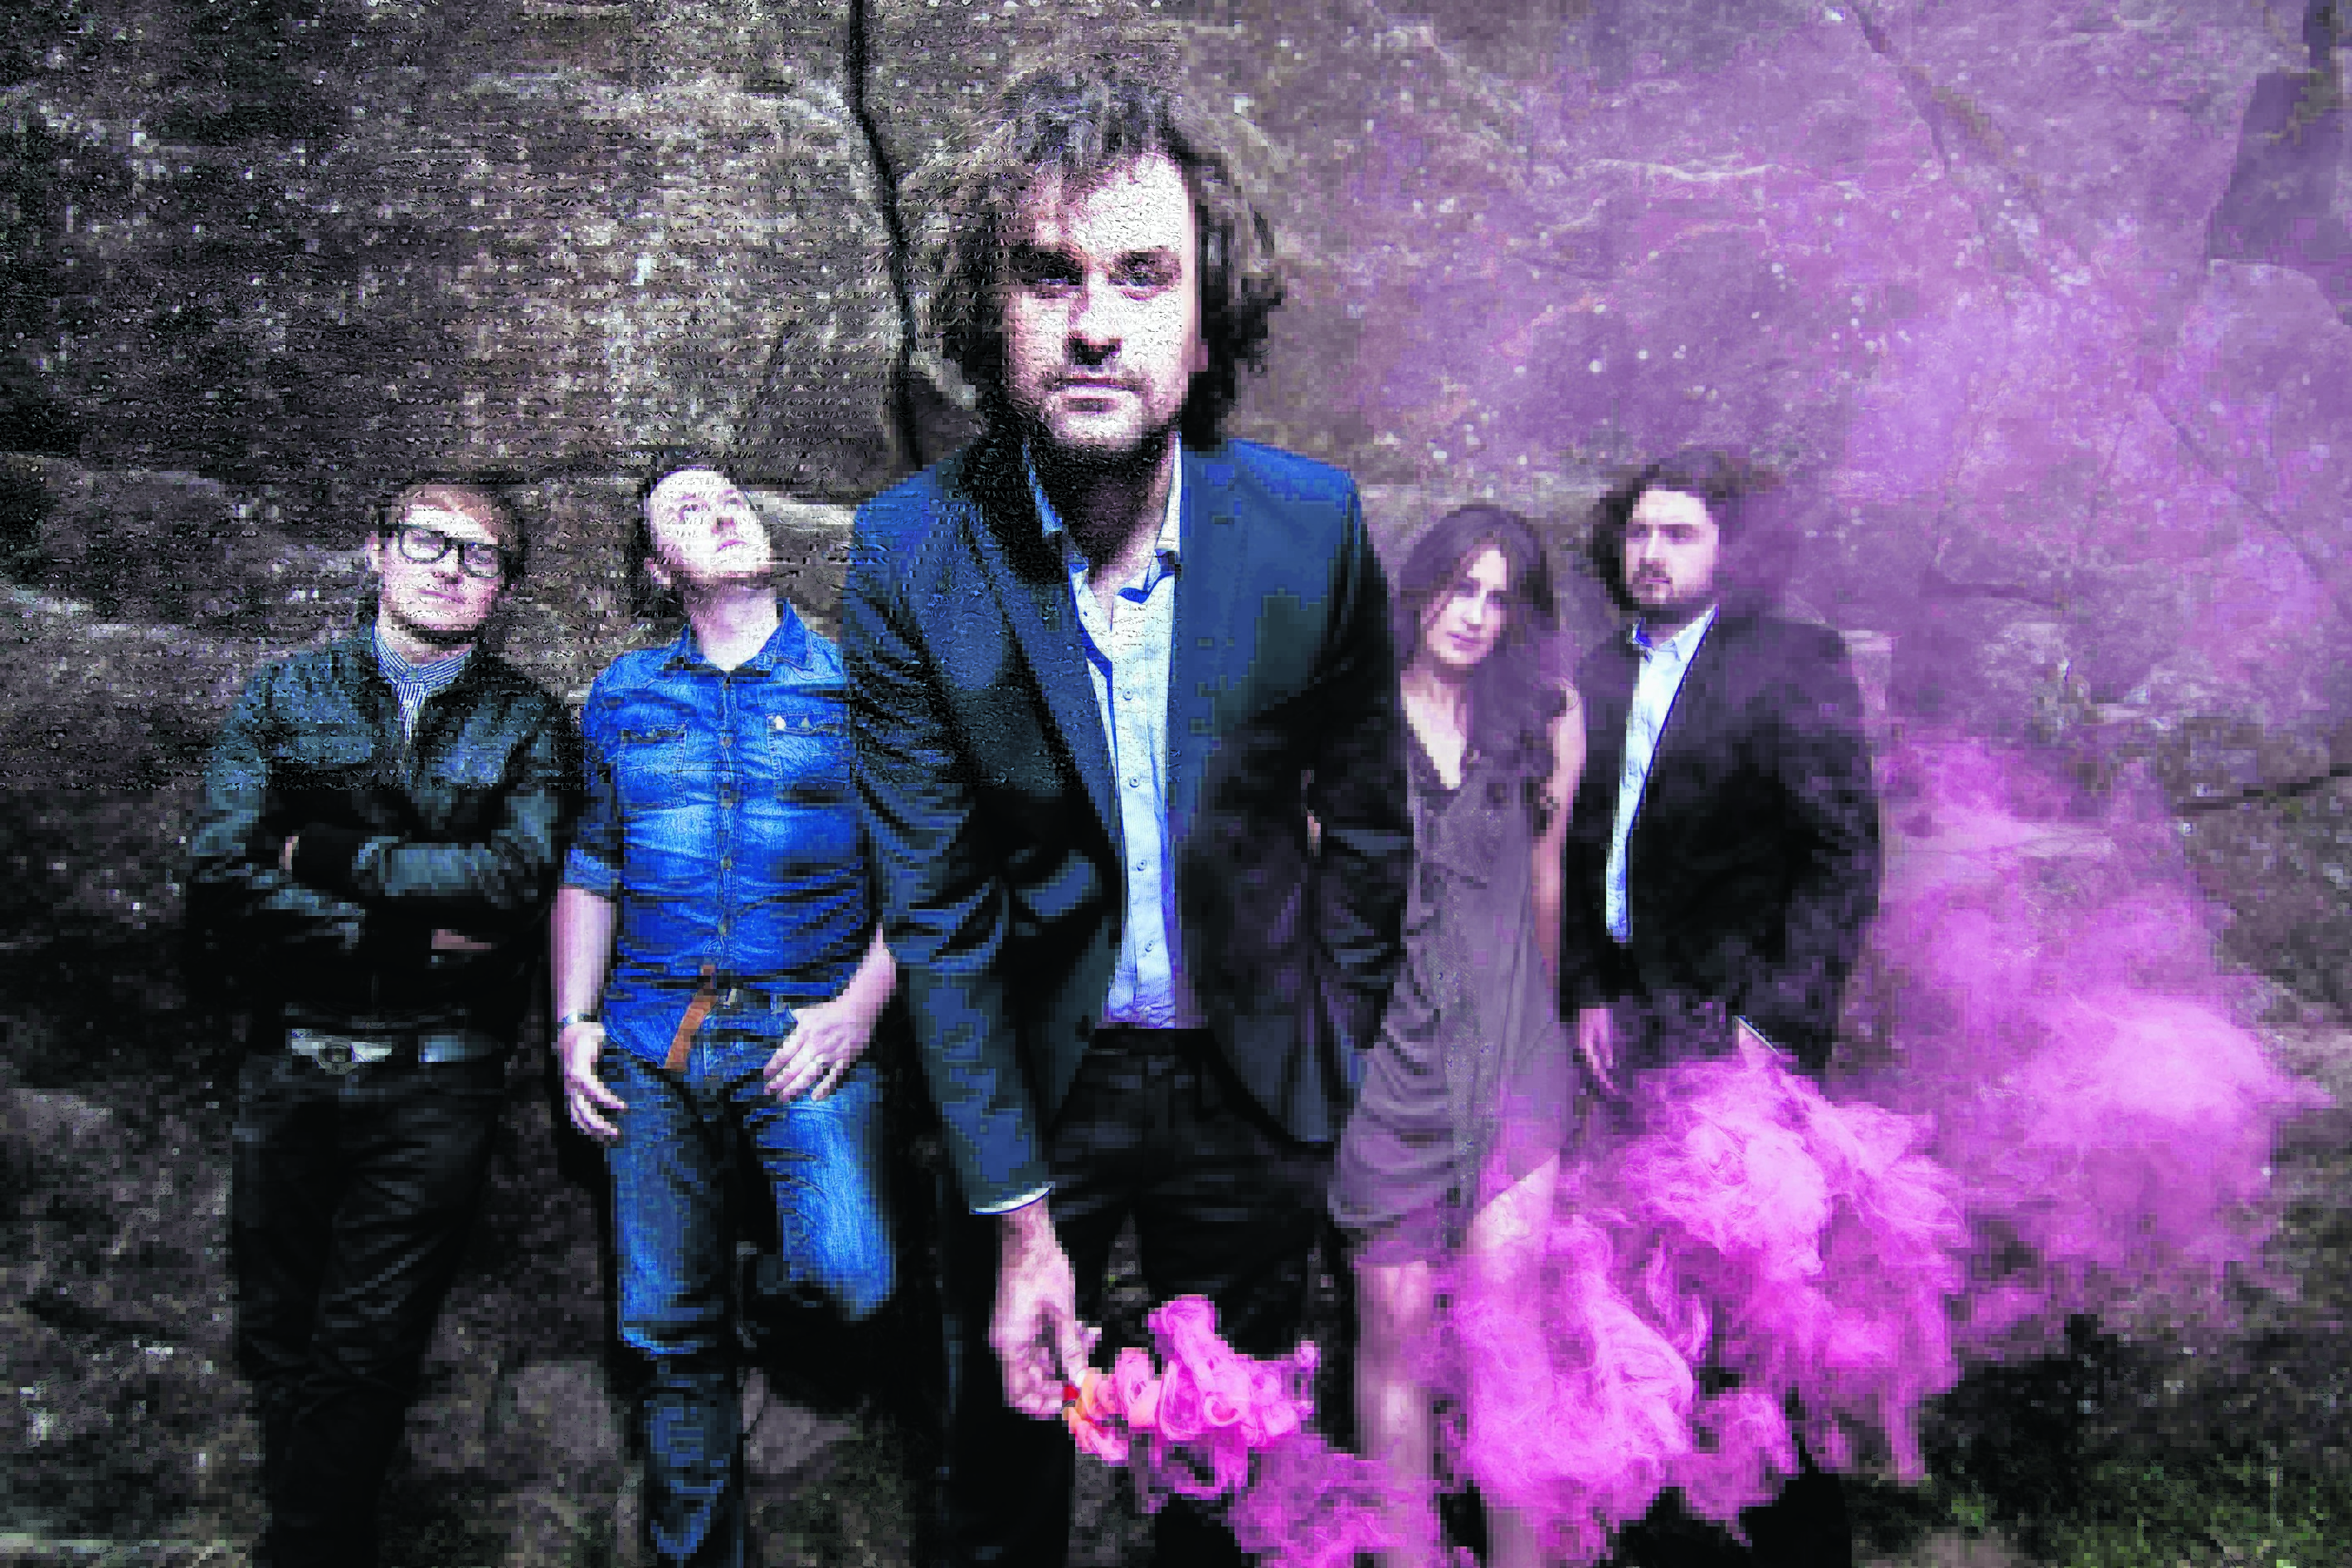 Reverend & The Makers